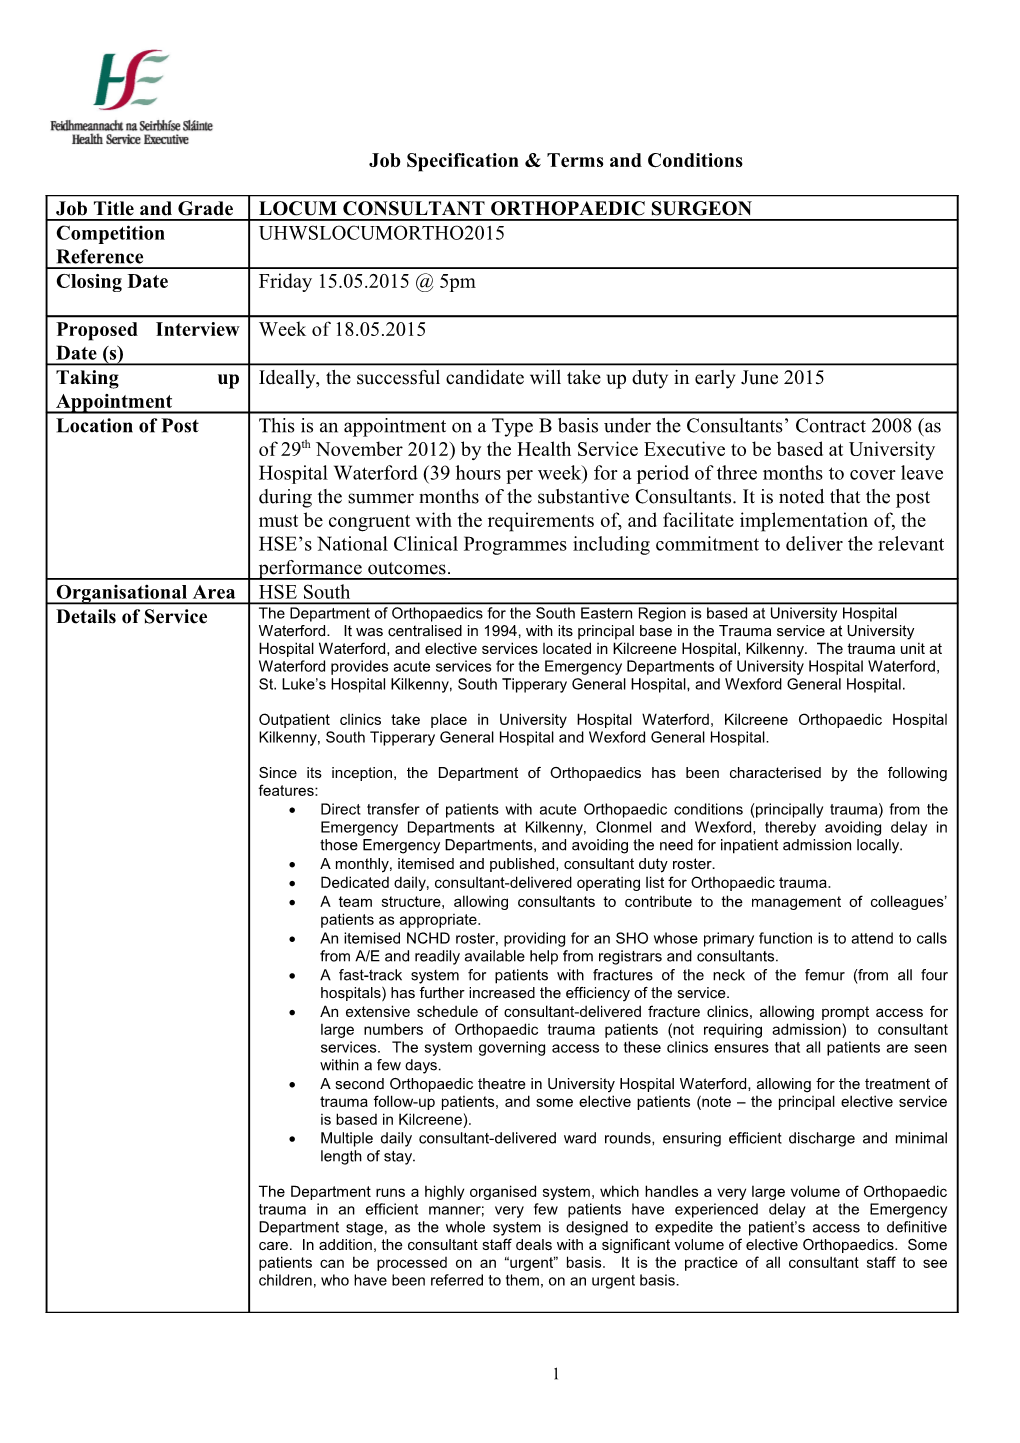 Job Specification & Terms and Conditions s3